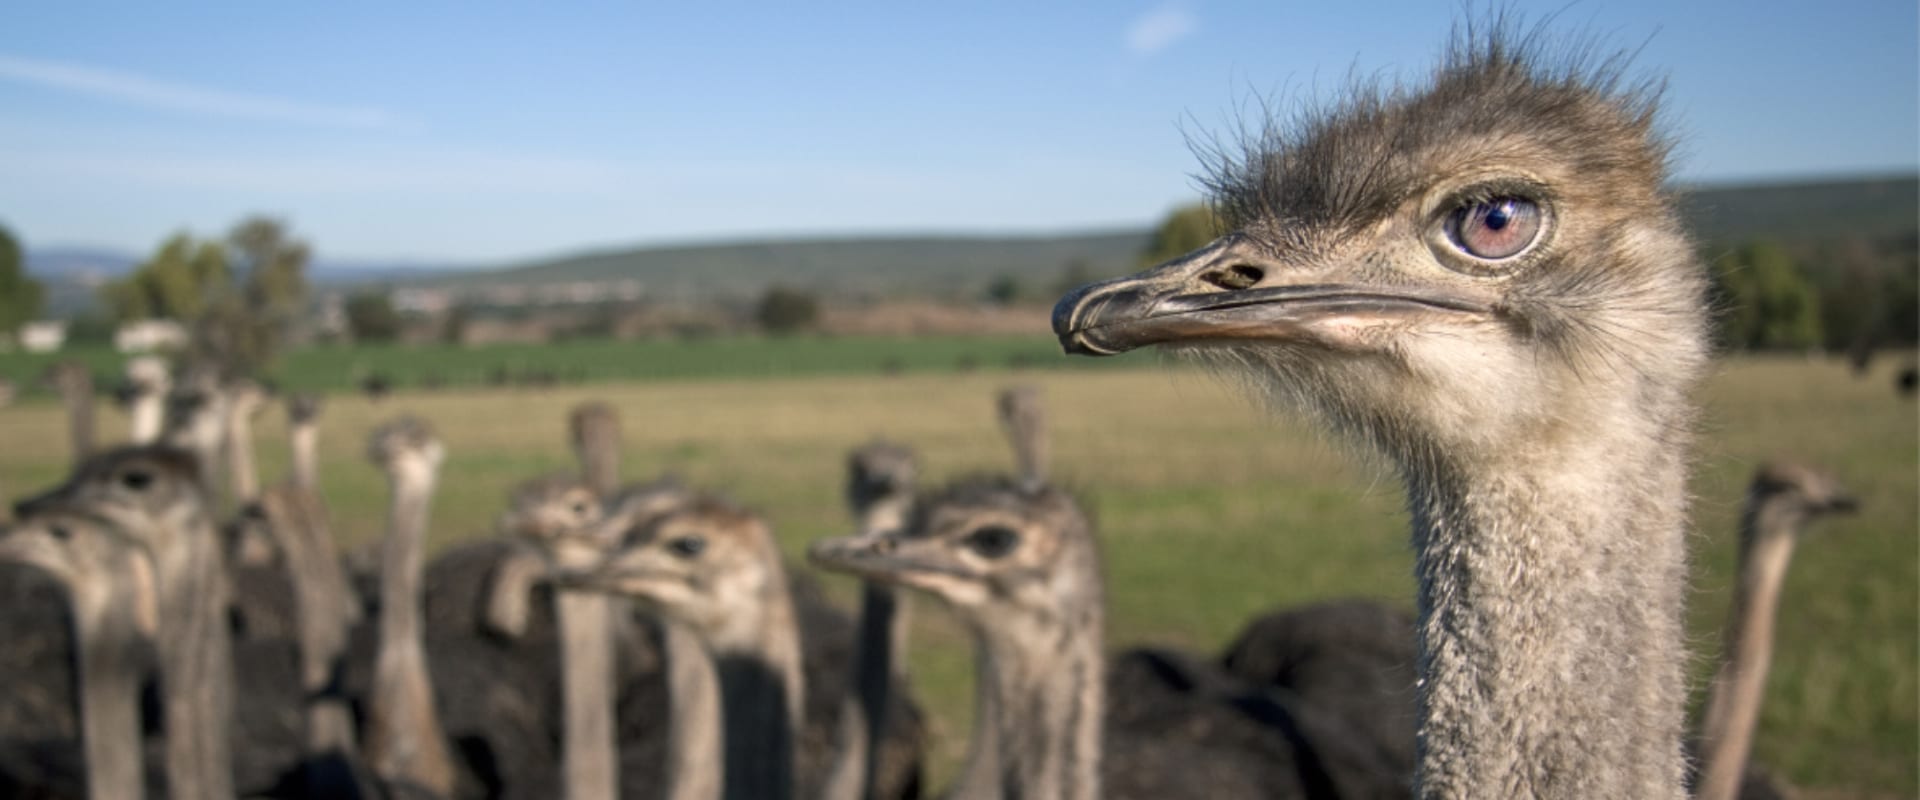 Visit an ostrich farm for a fascinating insight into the world’s largest bird